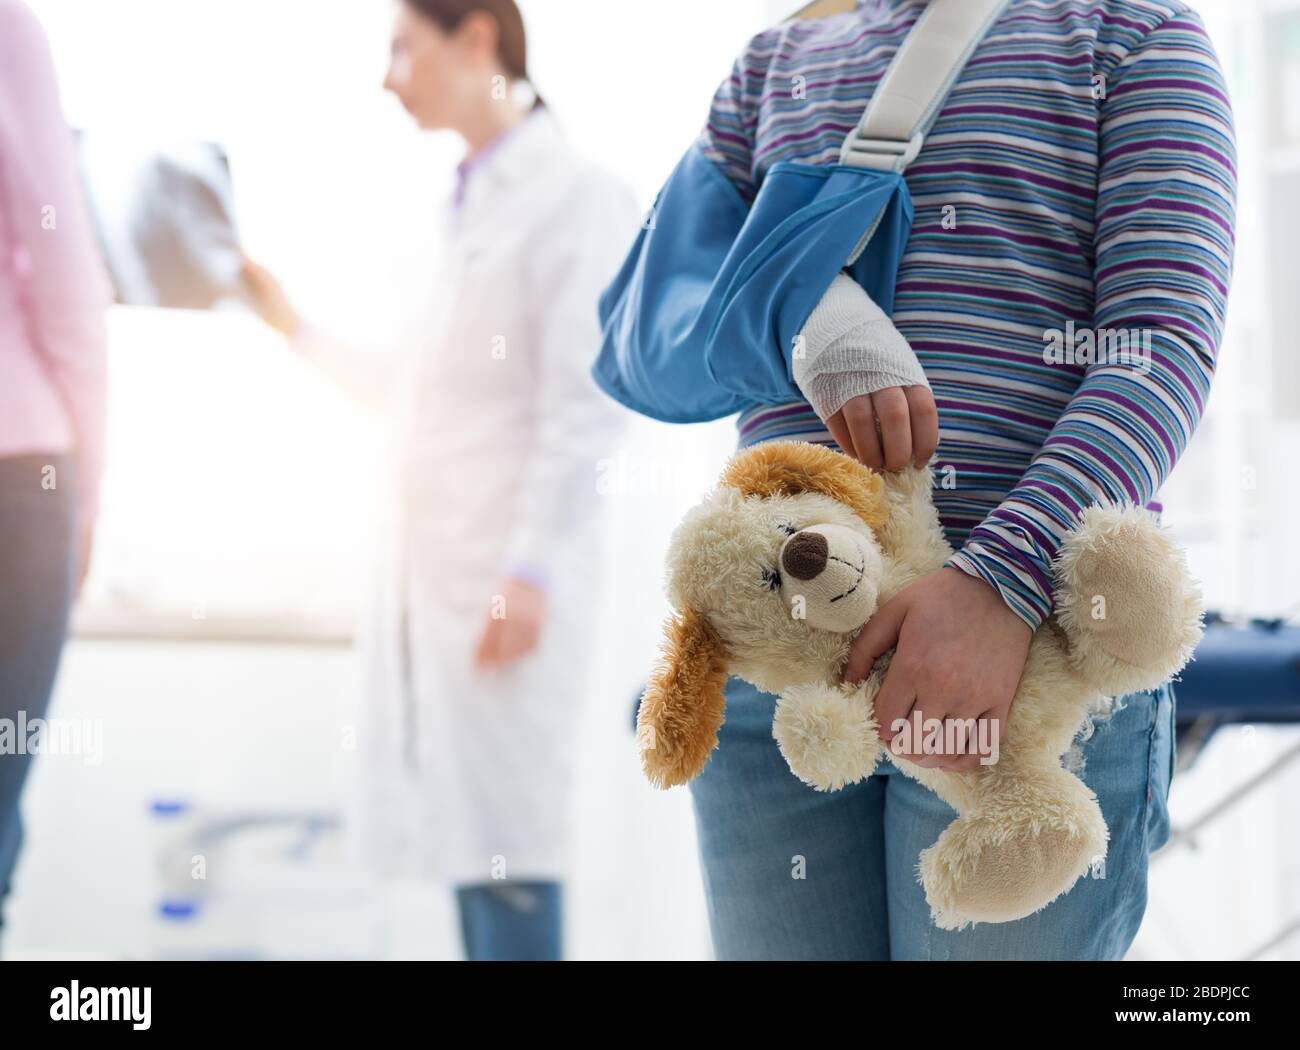 Cute little girl with broken arm in the gypsum with teddy bear